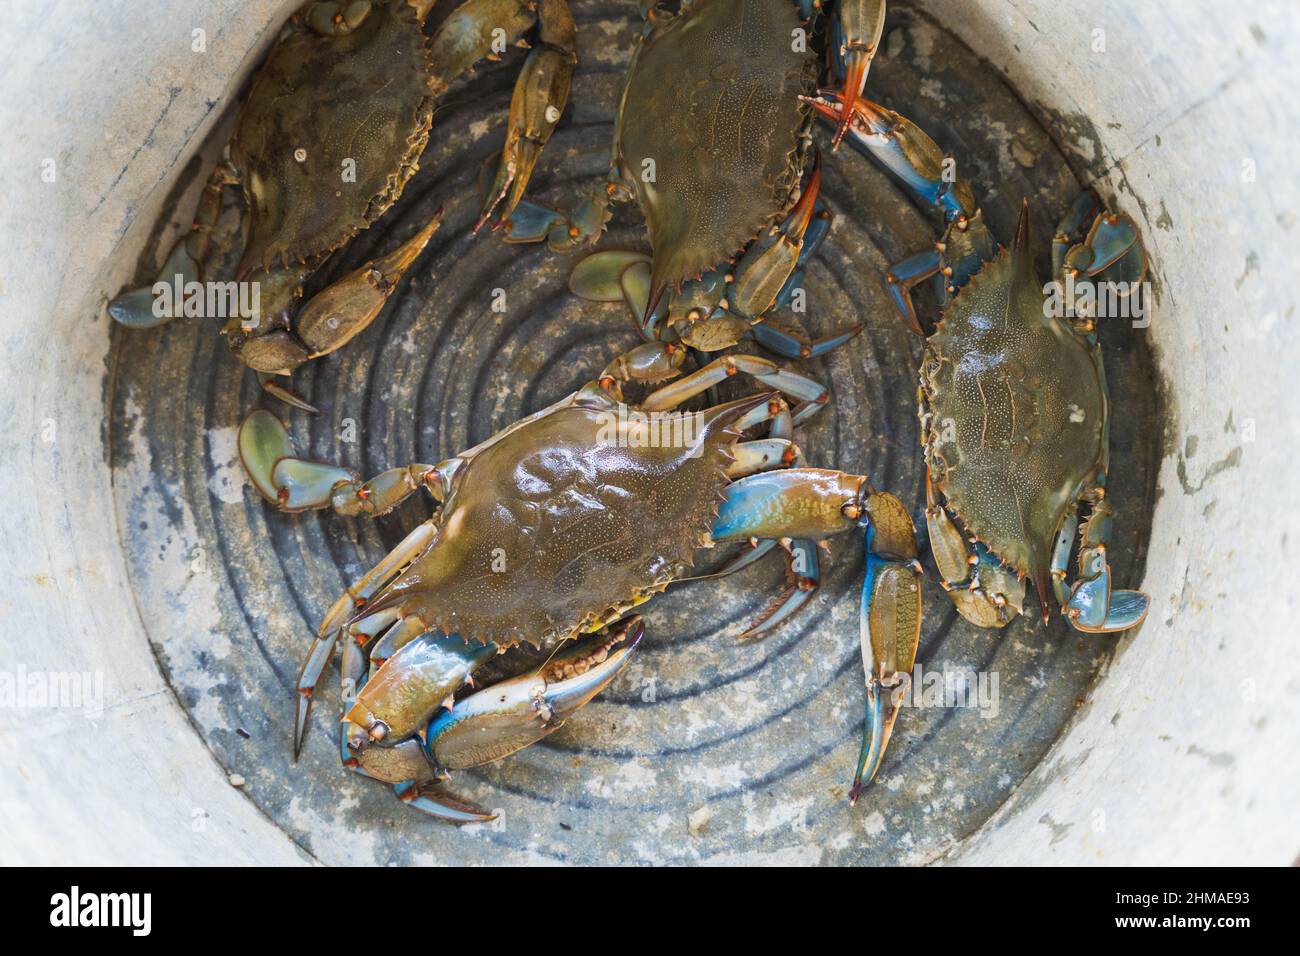 Blue crabs gather in a metal tub waiting to be processed Stock Photo